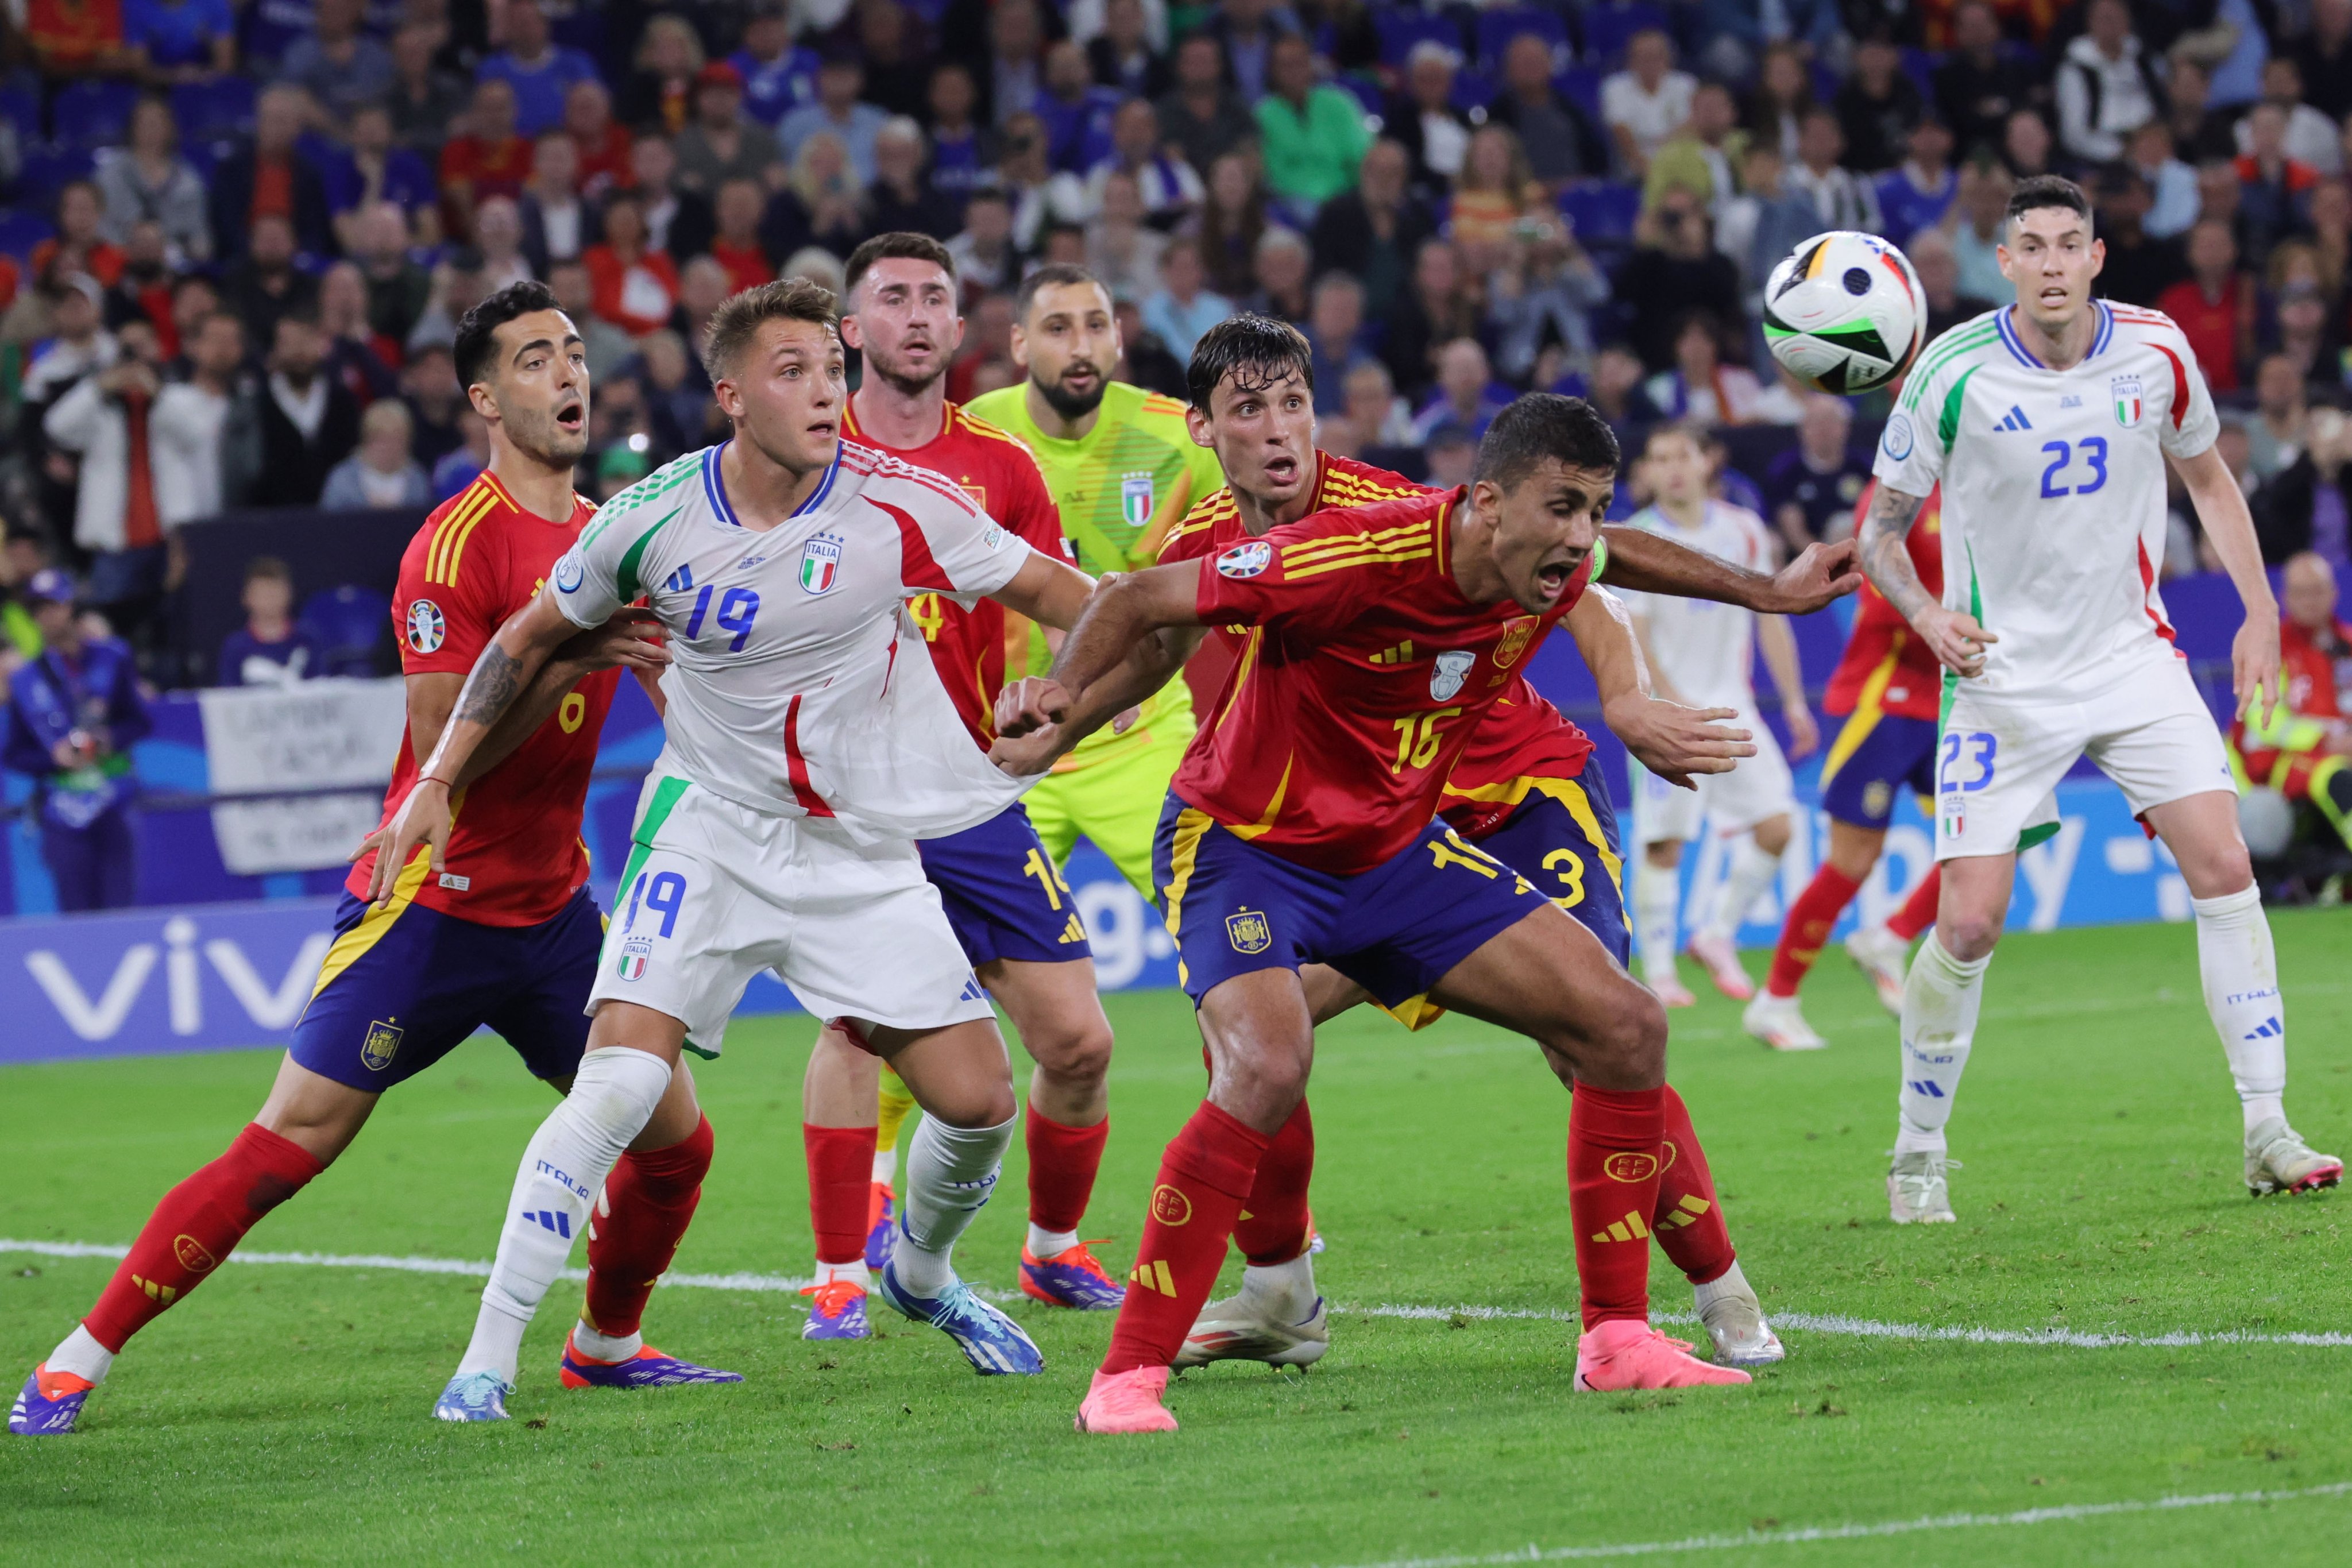 Italy (in white) are outnumbered on a night when Spain gave a statement of intent. Photo: EPA-EFE